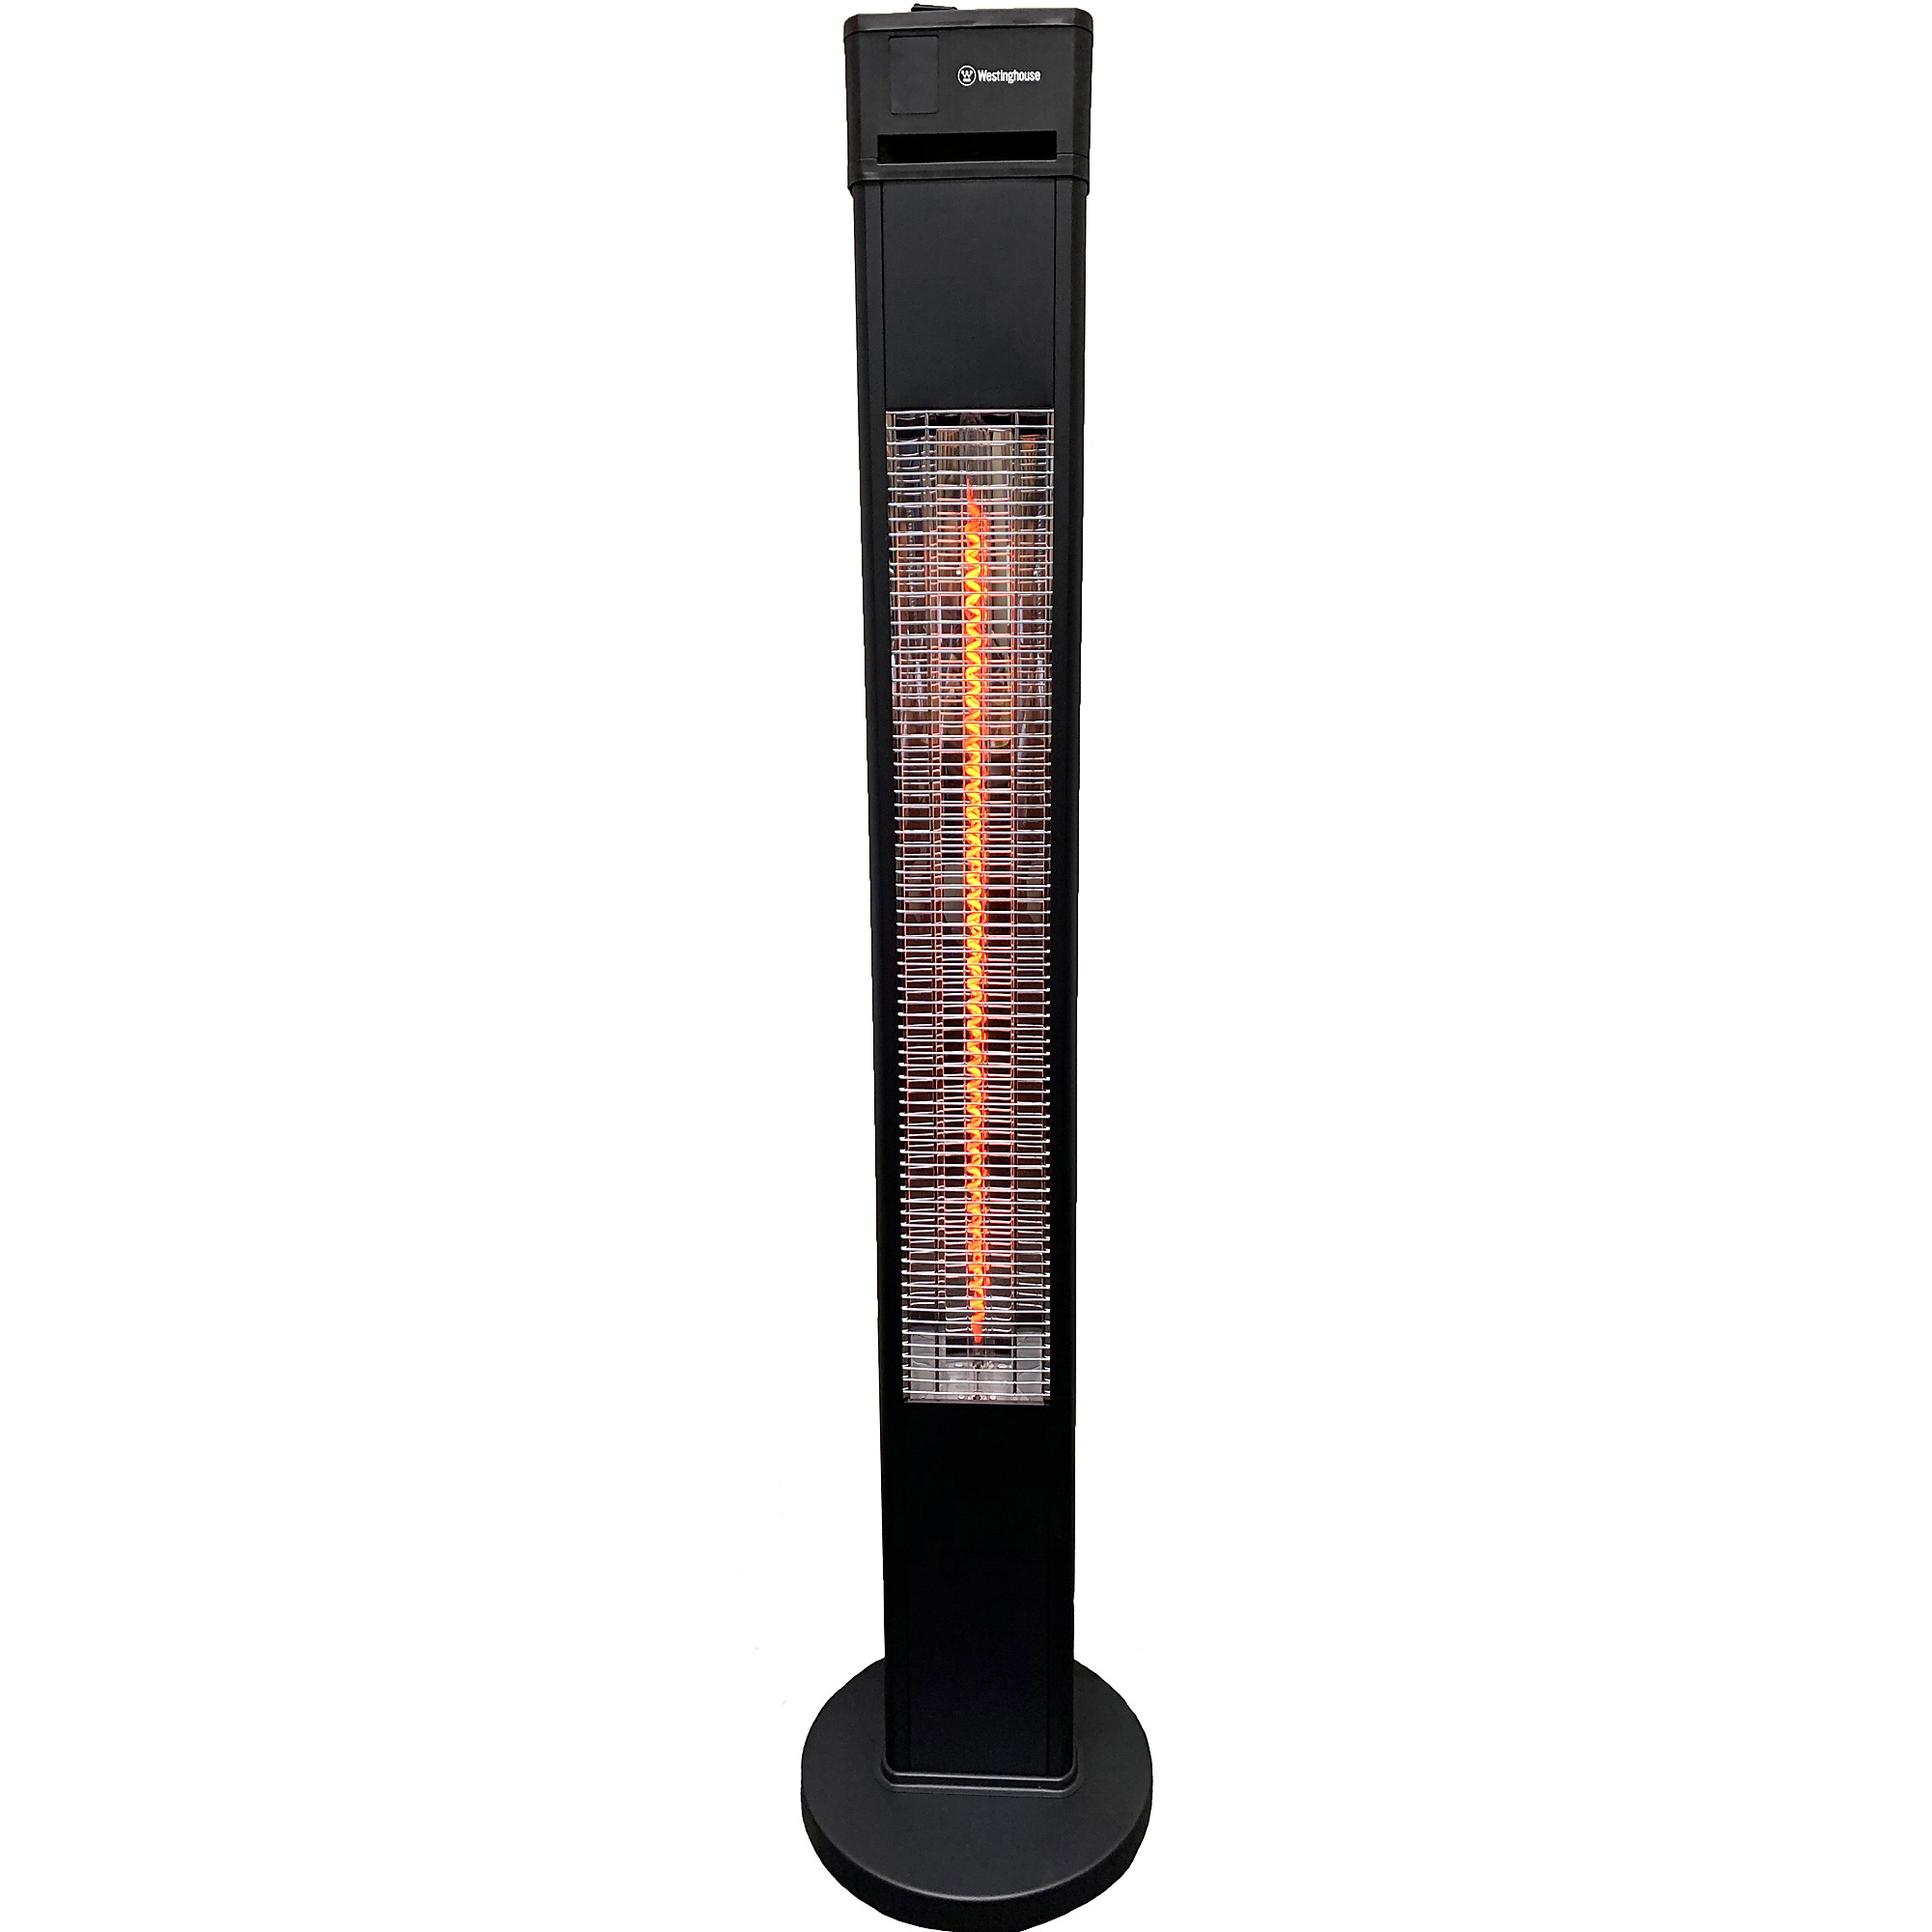 Westinghouse, Tall Standing Patio Heater, Model WES31-15110BLK